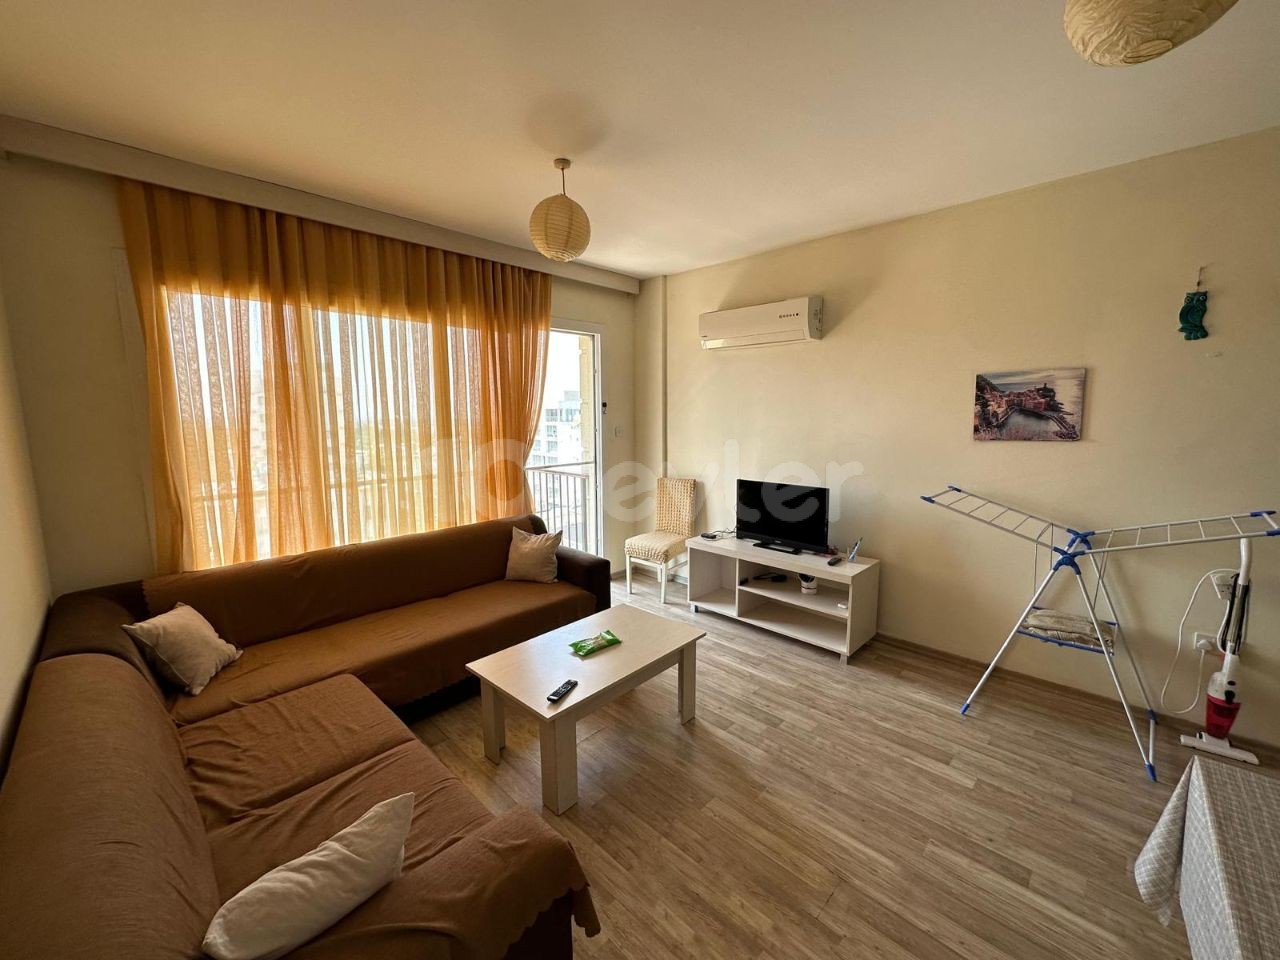 FULLY FURNISHED 2+1 FLAT FOR RENT WITH MOUNTAIN AND SEA VIEWS NEAR NUSMAR MARKET IN KYRENIA CENTER. PEACE 05338376242